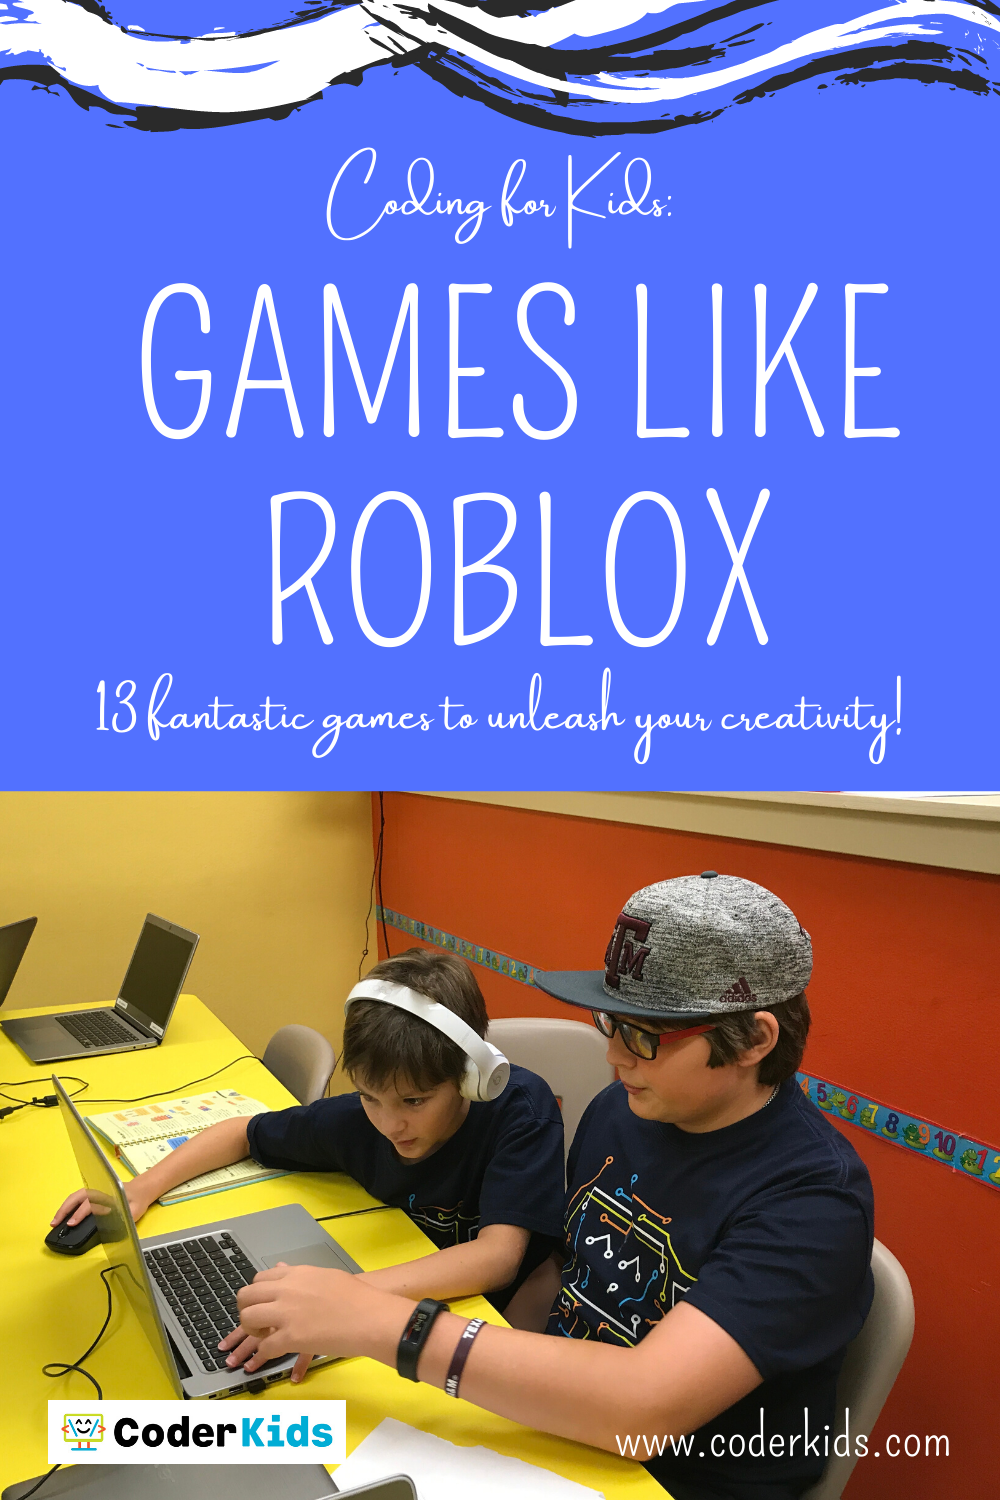 Roblox is now totally for adults with 17+ rated violent games